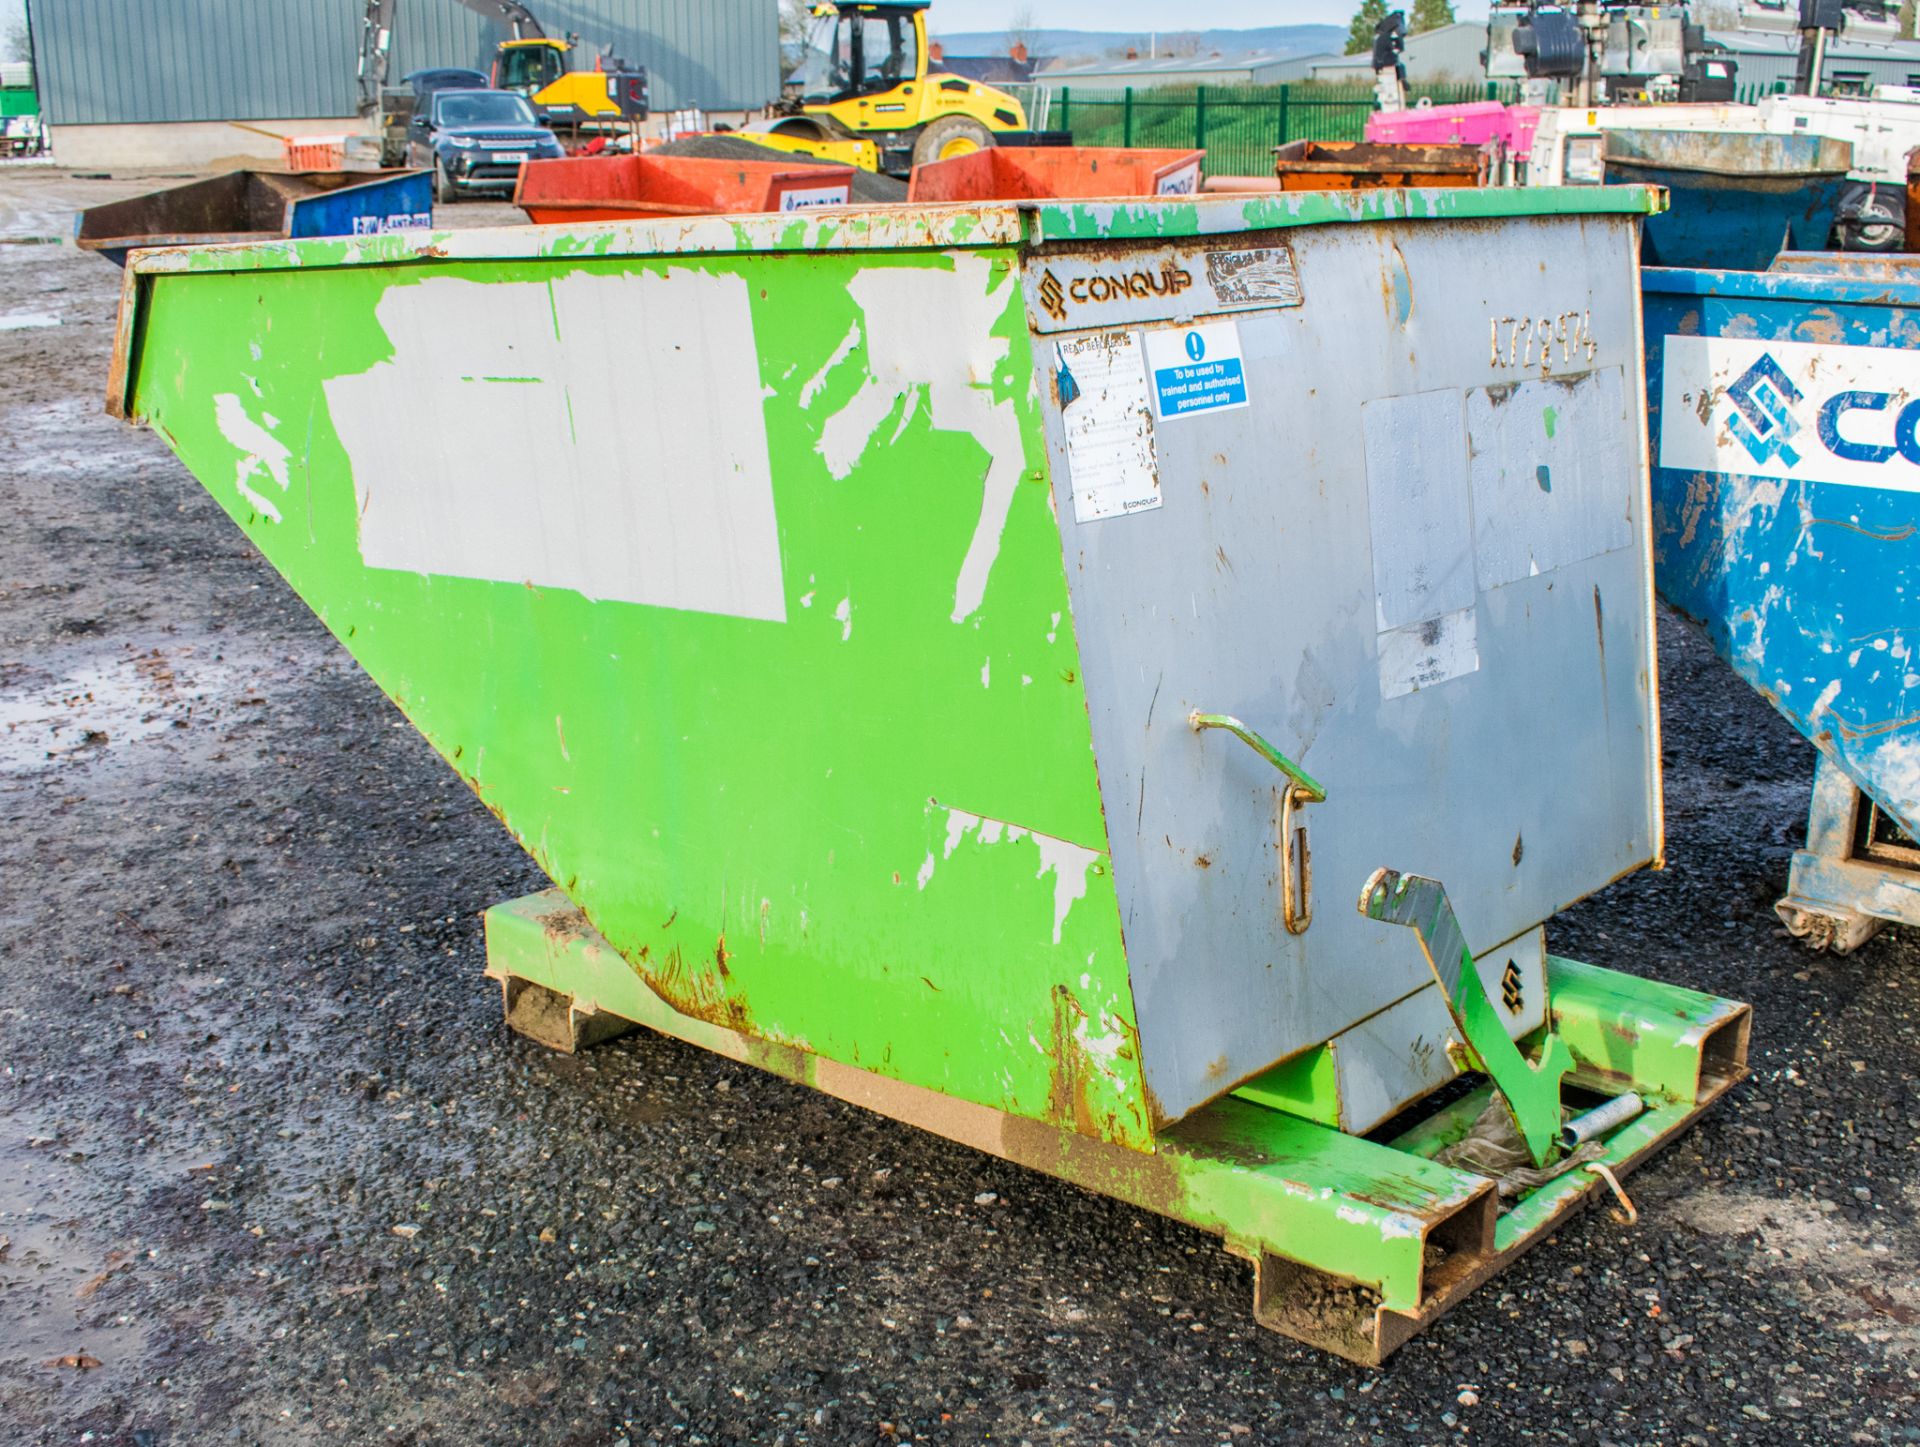 Conquip tipping skip A728974 - Image 2 of 2